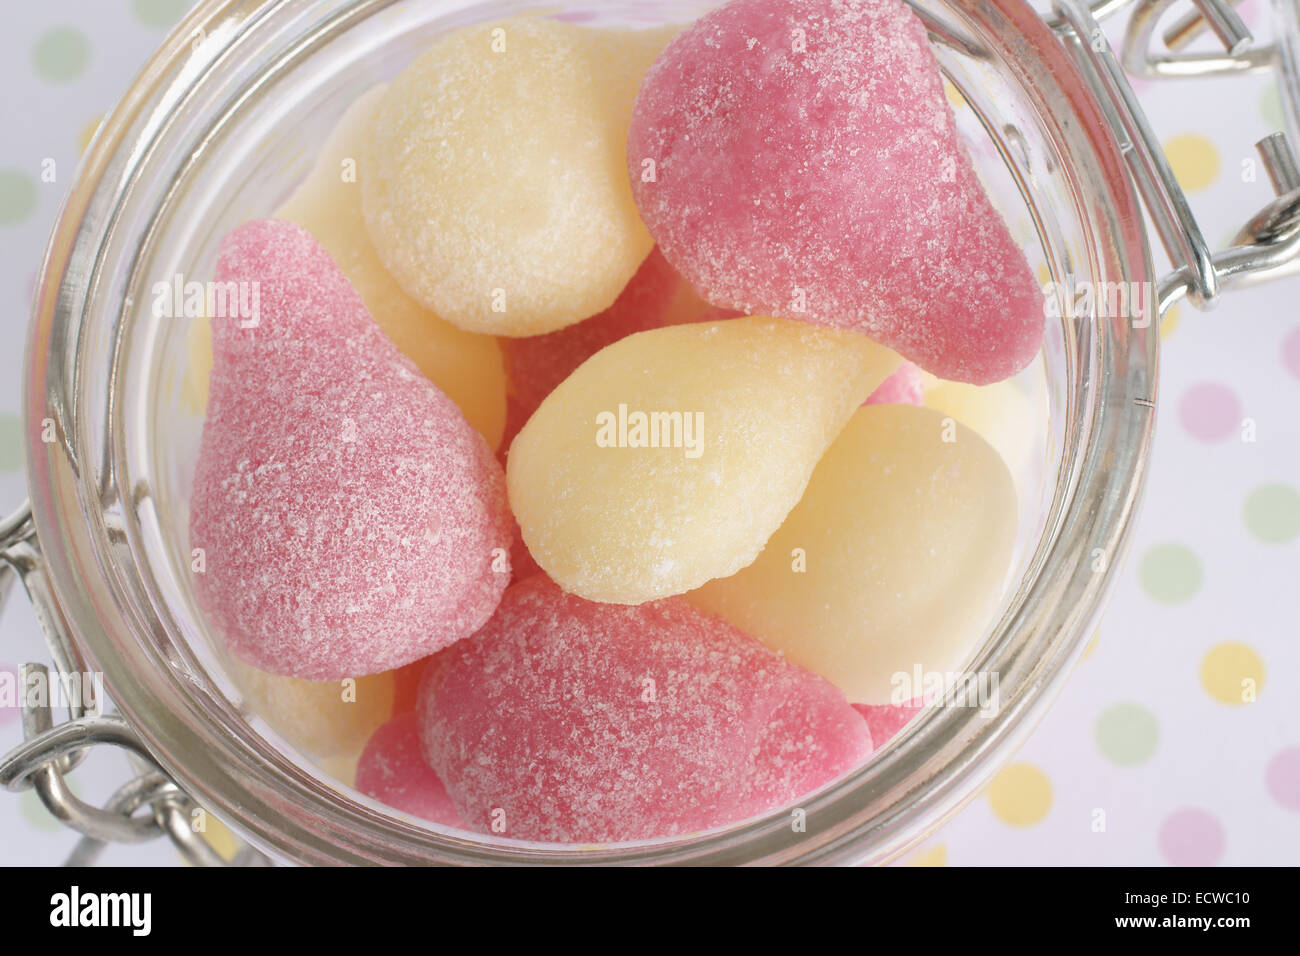 Pear Drops a classic British boiled sweet traditionally in pink and yellow Stock Photo